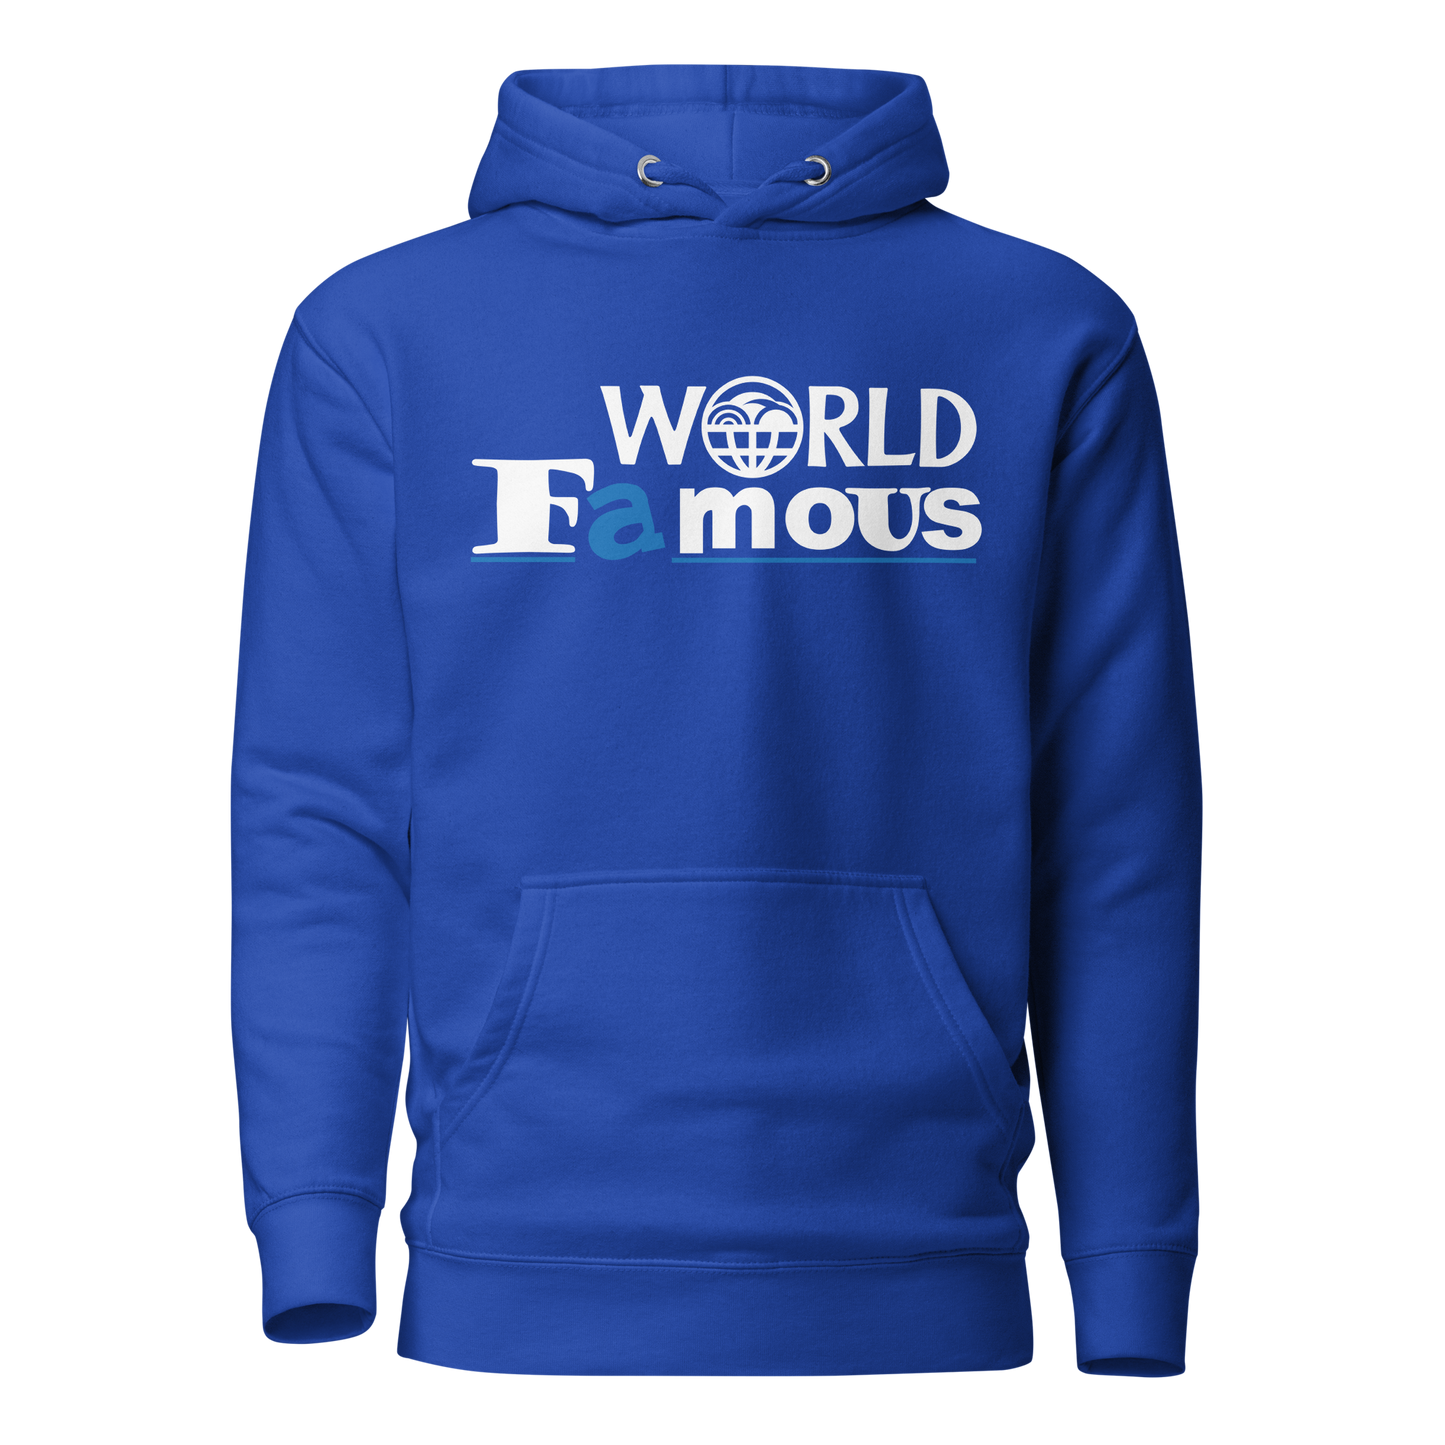 WORLD FAMOUS HOODIE